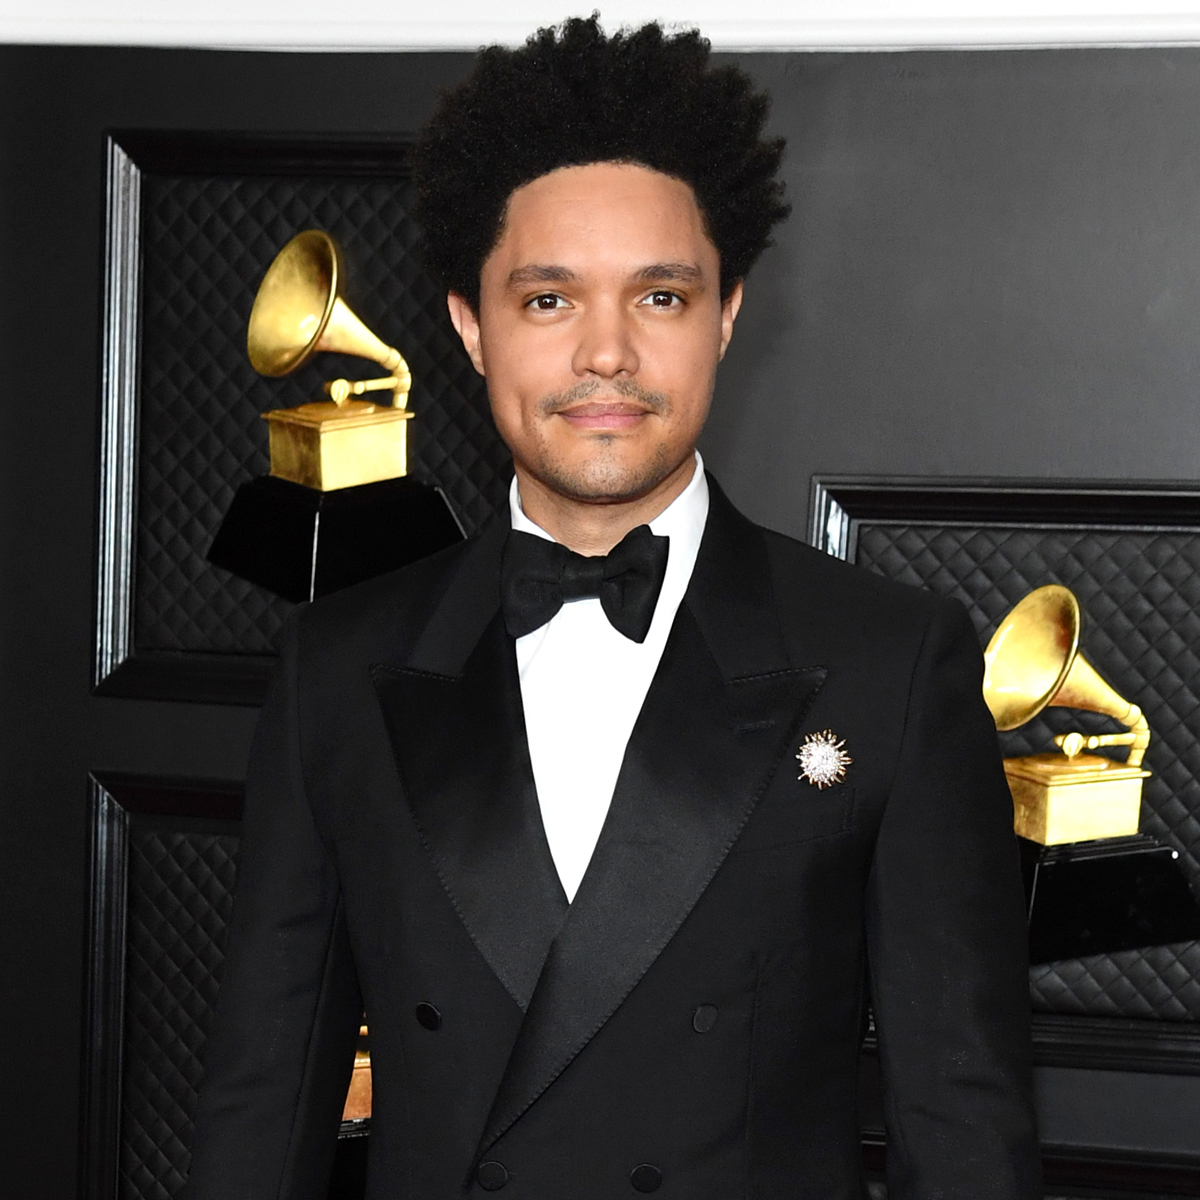 Grammys 2021: Hottest Men in Tuxedos, Suits